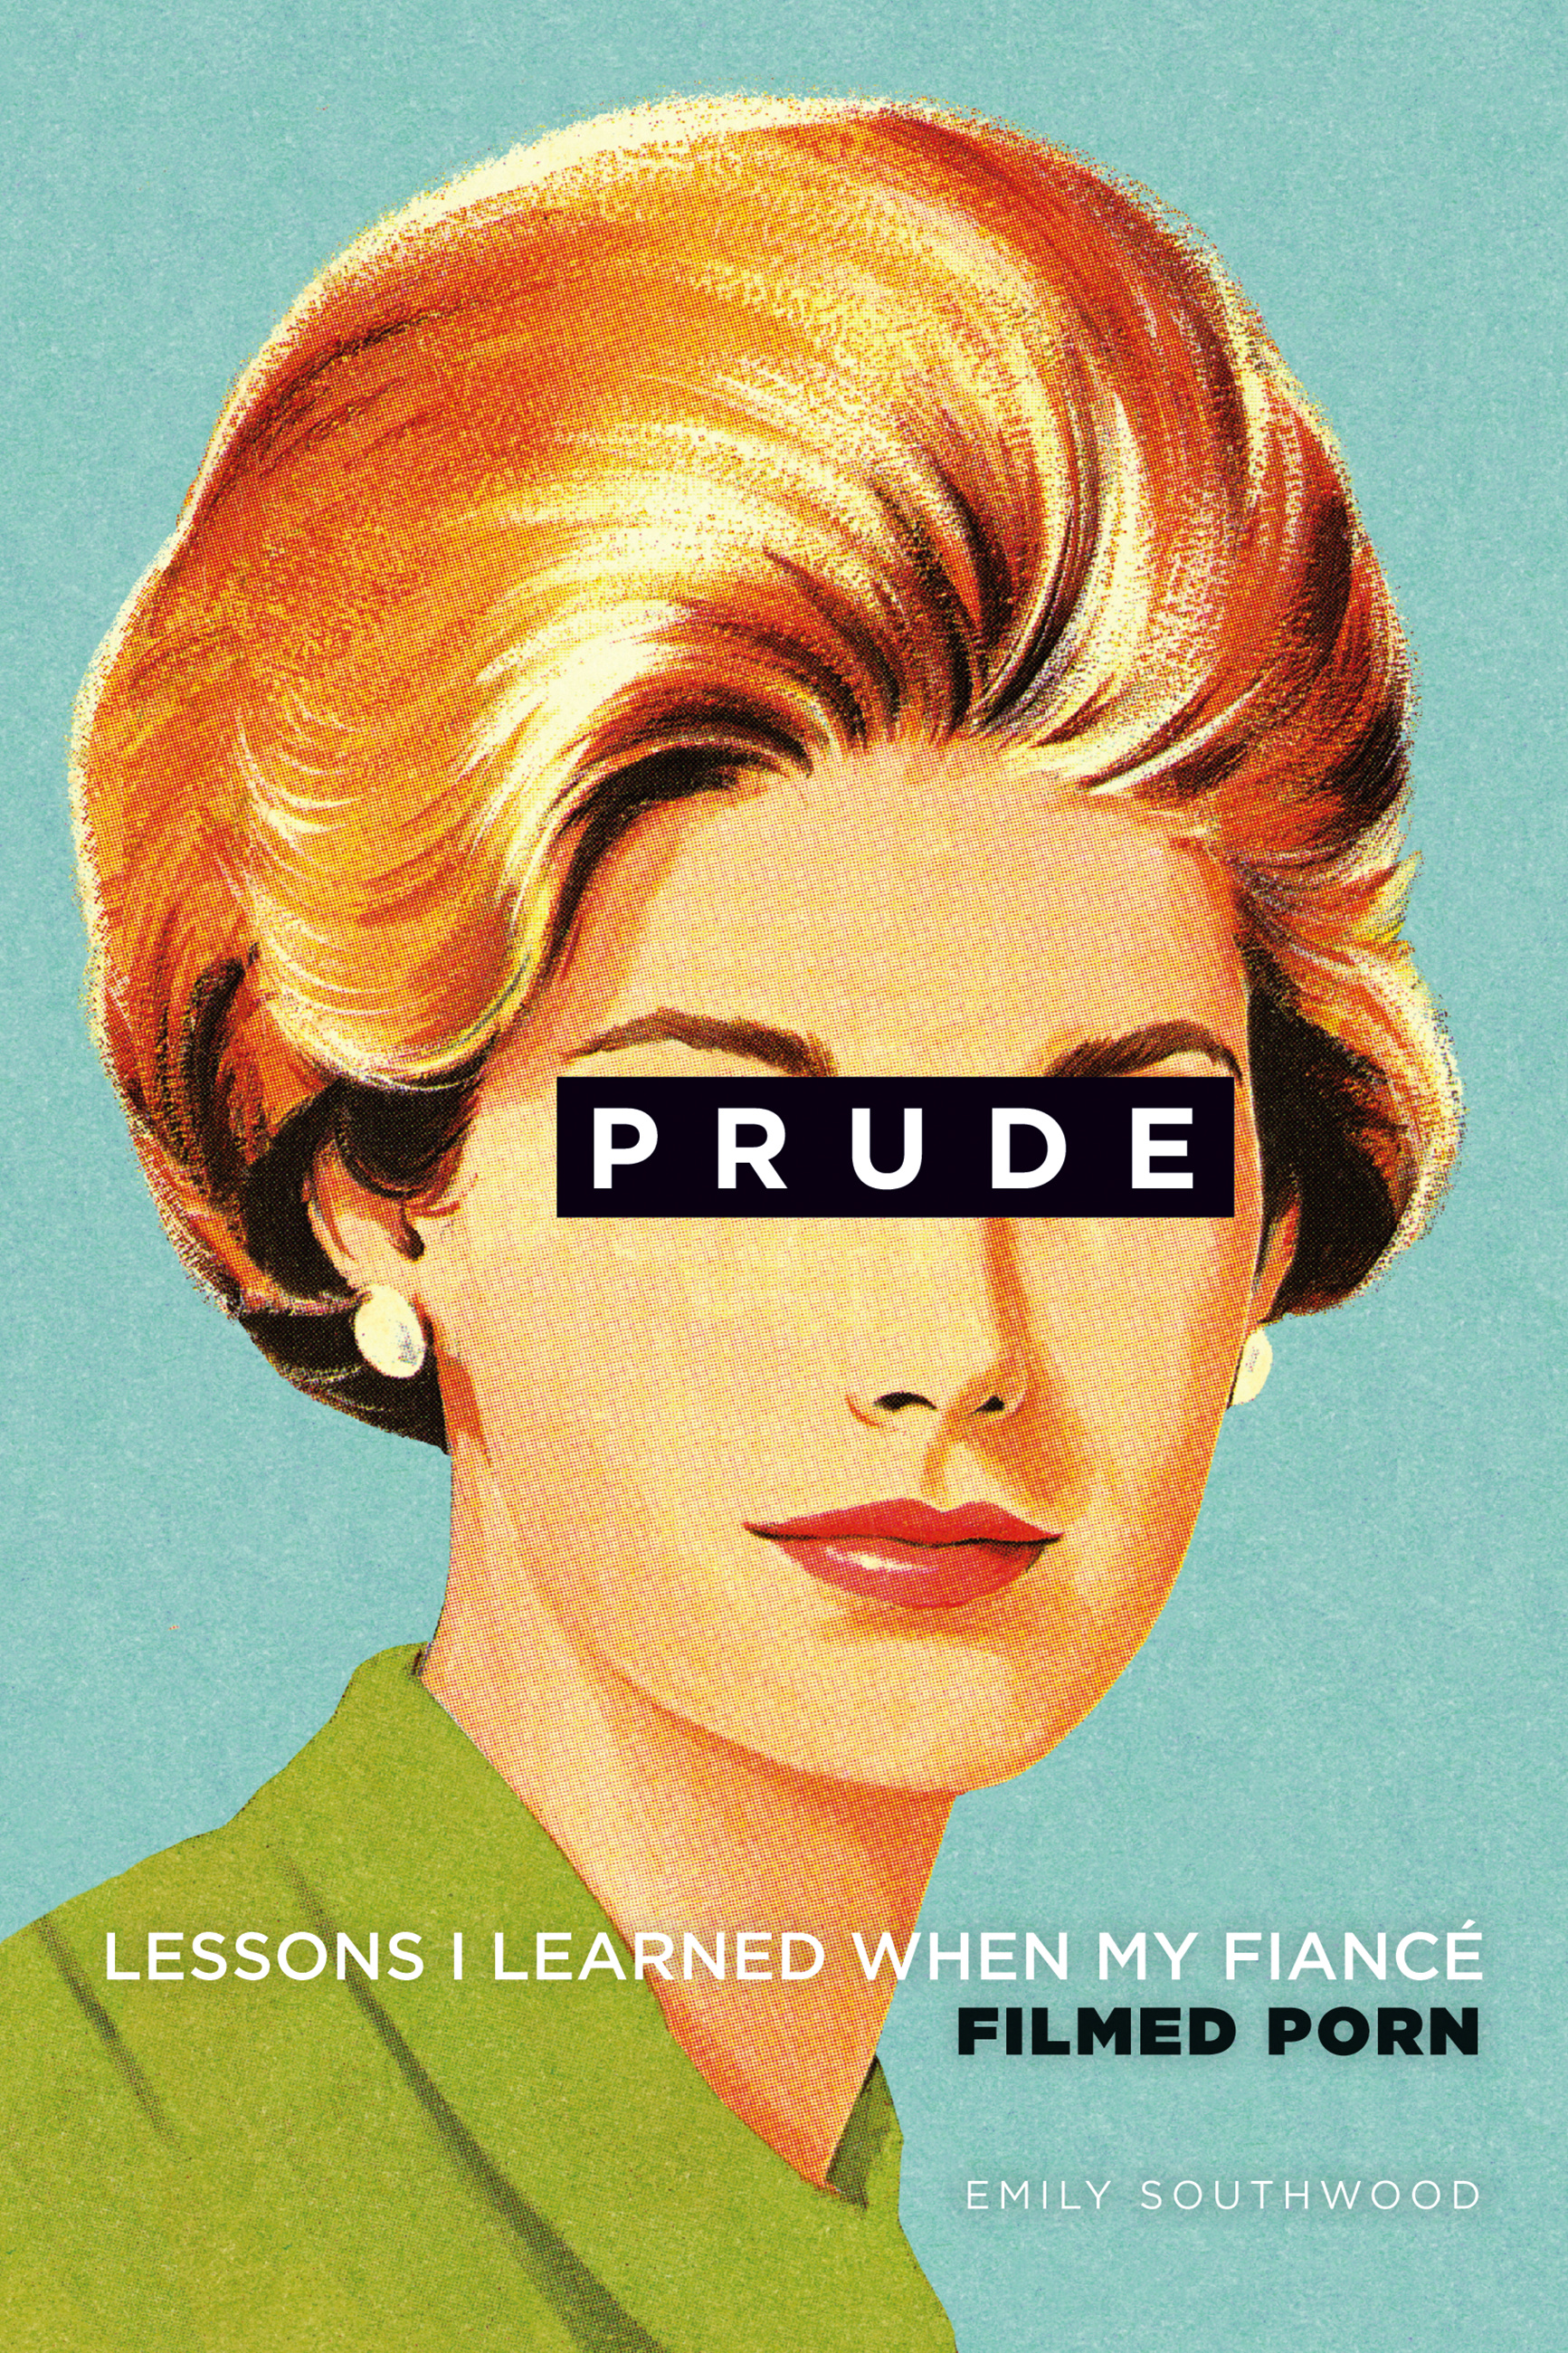 Prude by Emily Southwood | Hachette Book Group